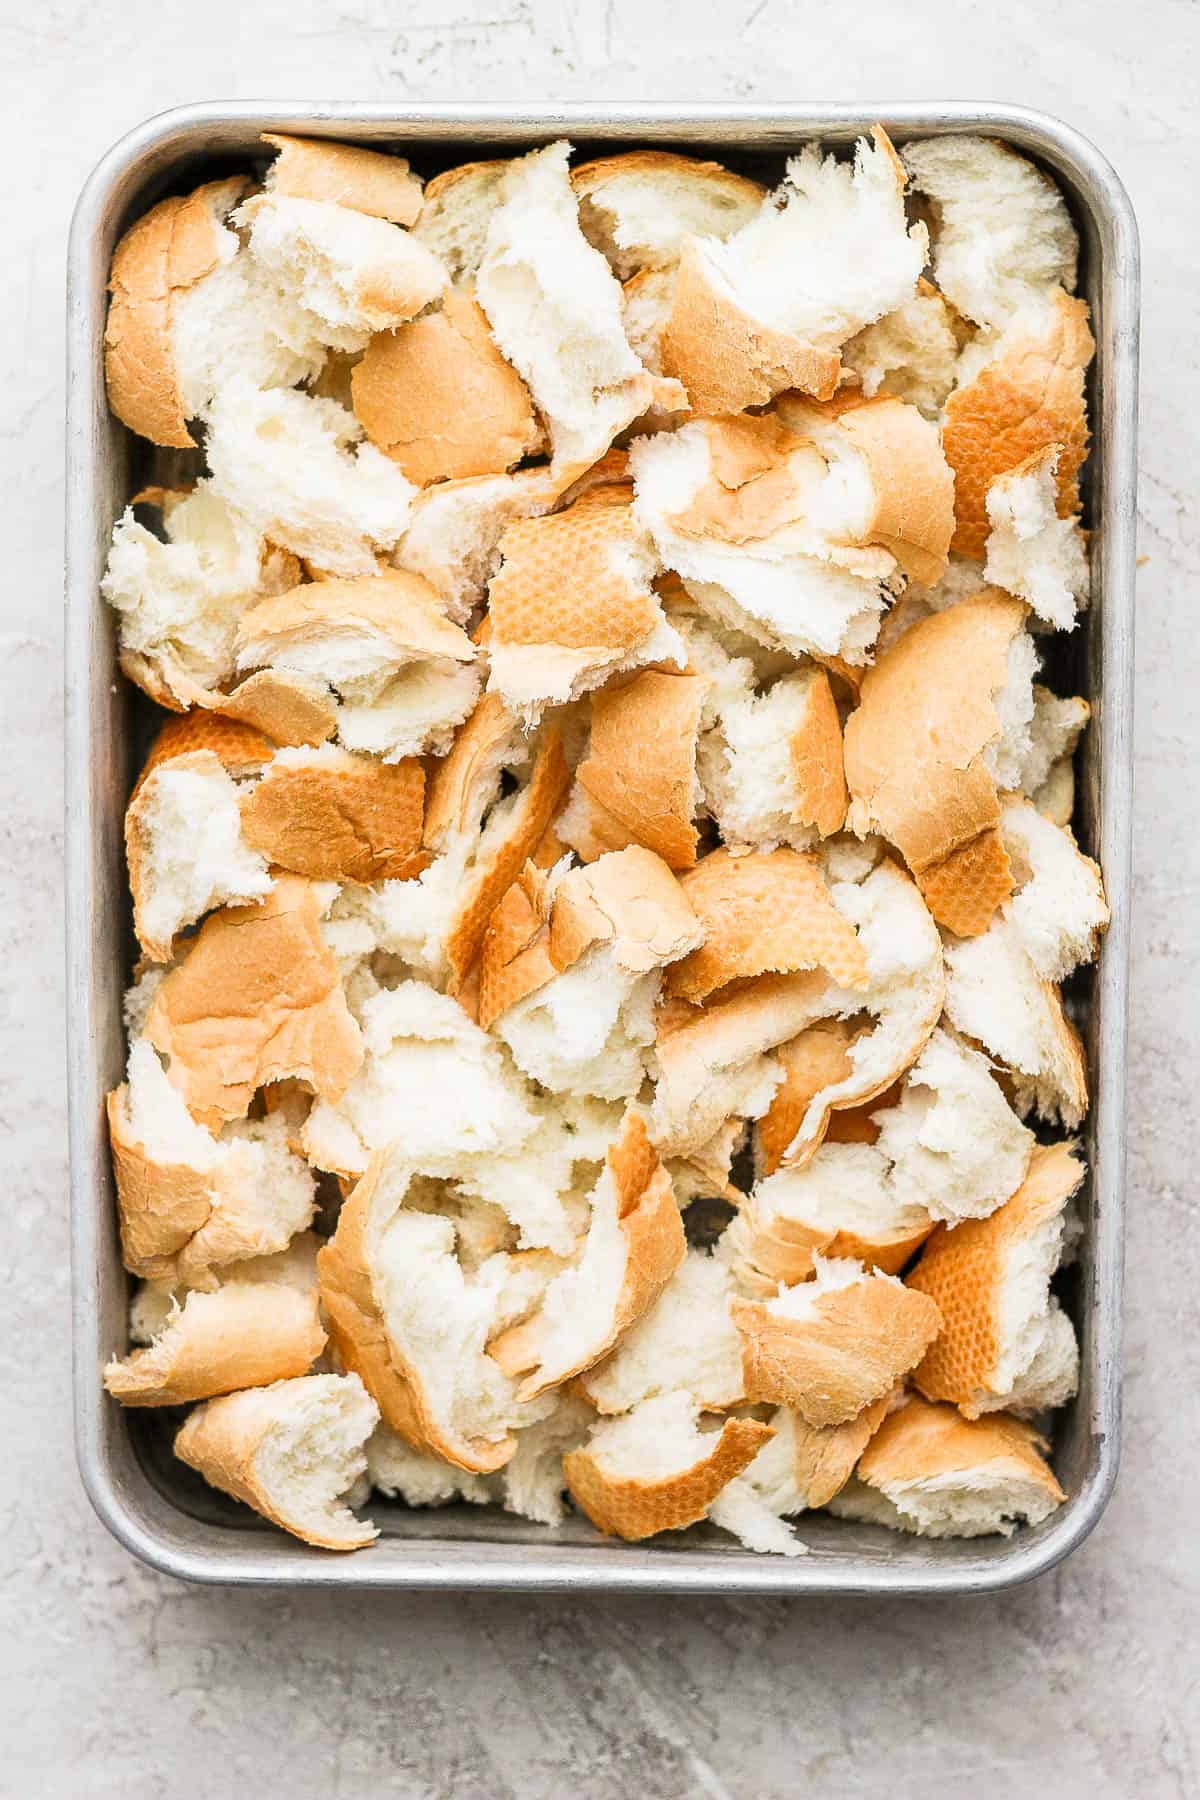 A 9x13 baking pan with chunks of french bread in it.